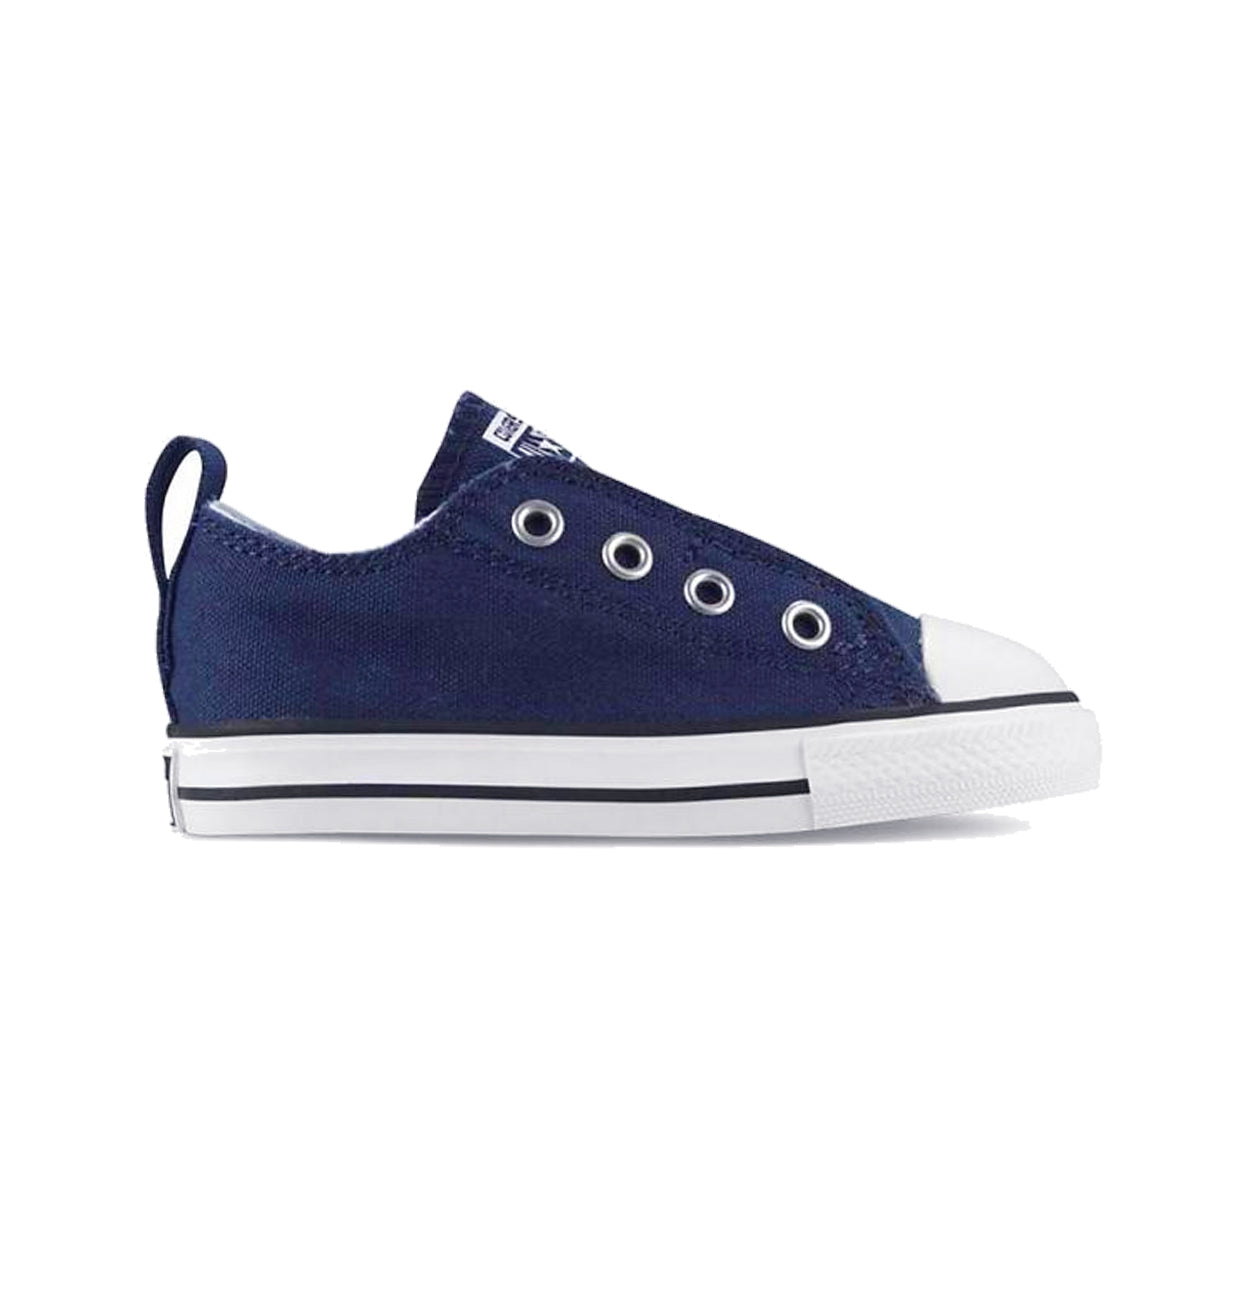 CONVERSE BREAKPOINT 2V OX – Surf Co.